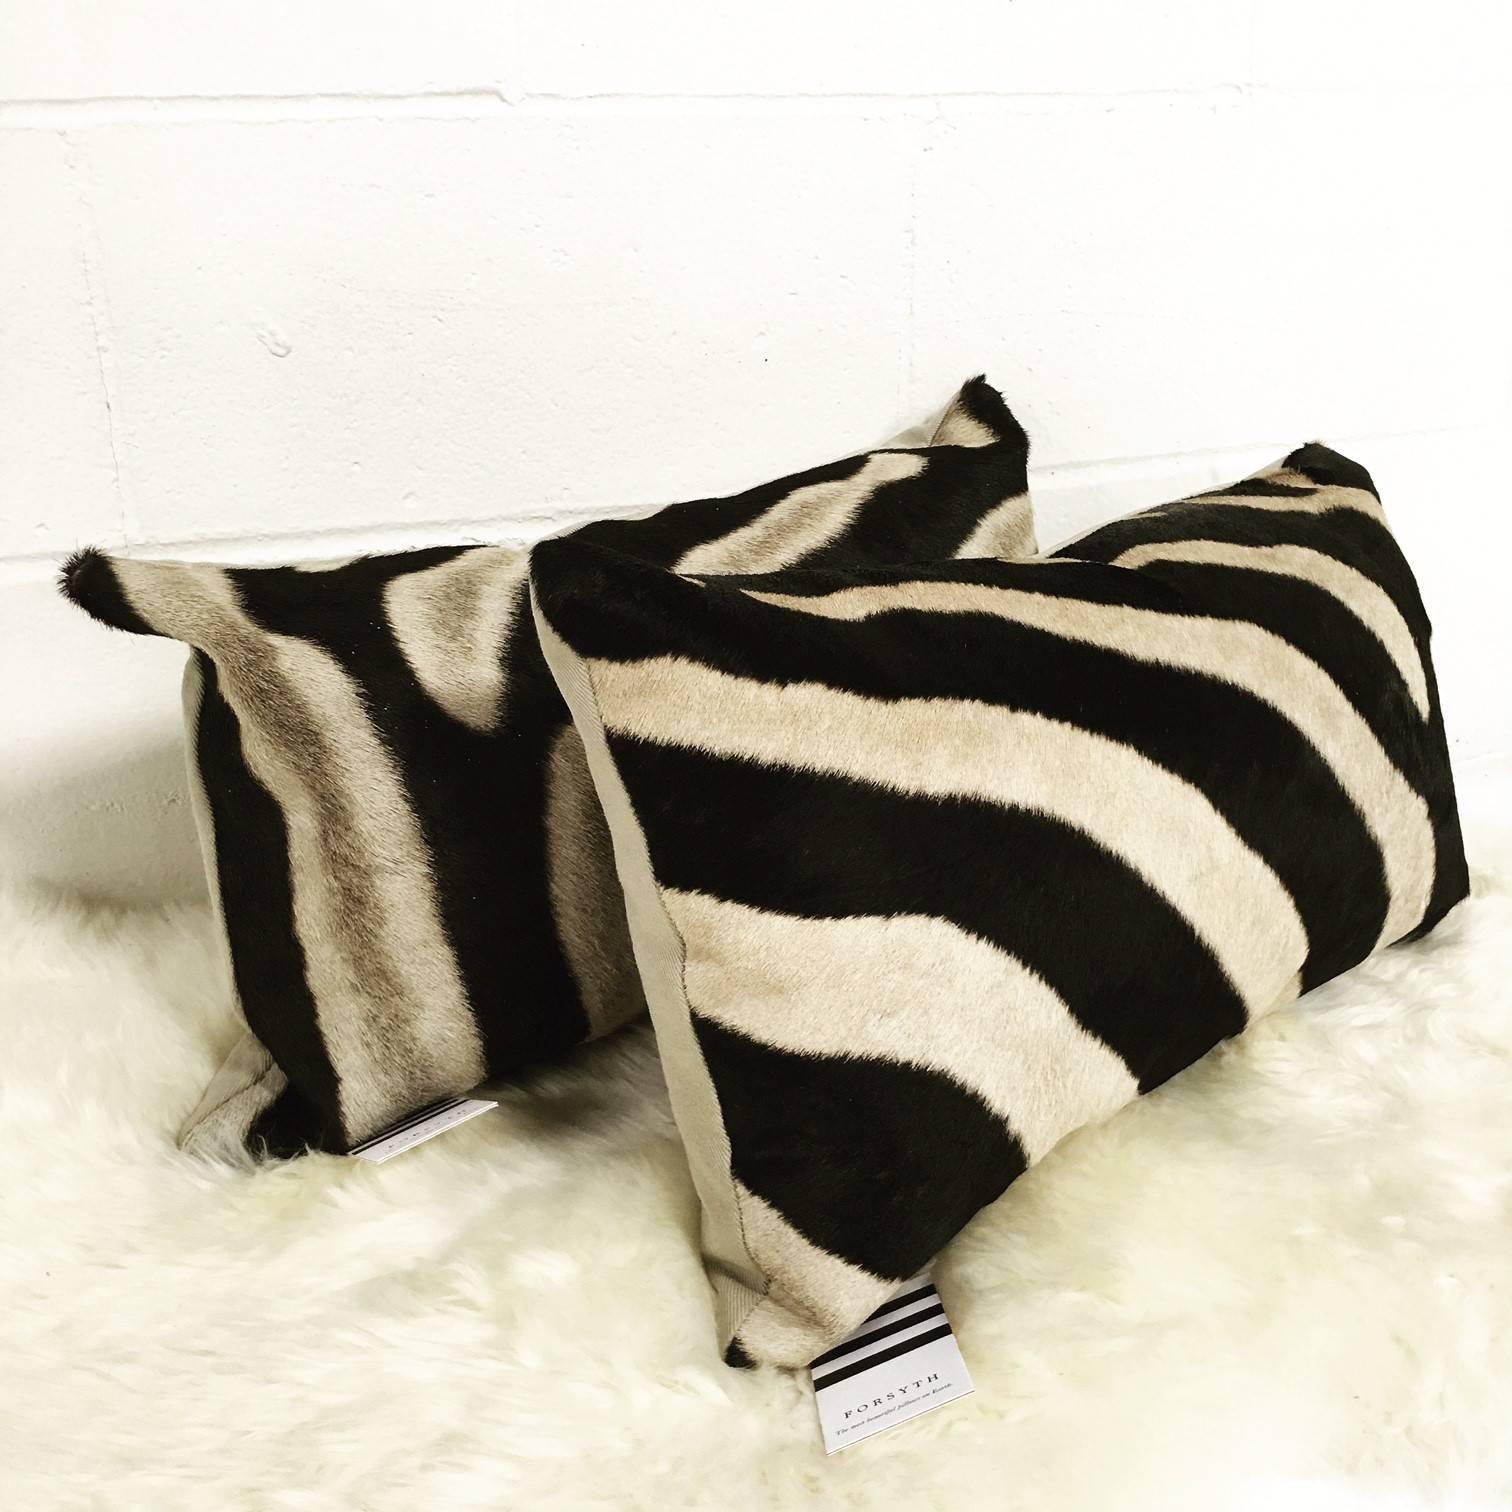 Forsyth zebra hide pillows are simply the best. The most beautiful hides are selected and hand-cut, hand-stitched and hand stuffed with the finest goose down. Each step is meticulously curated by Saint Louis based Forsyth artisans. Every pillow is a